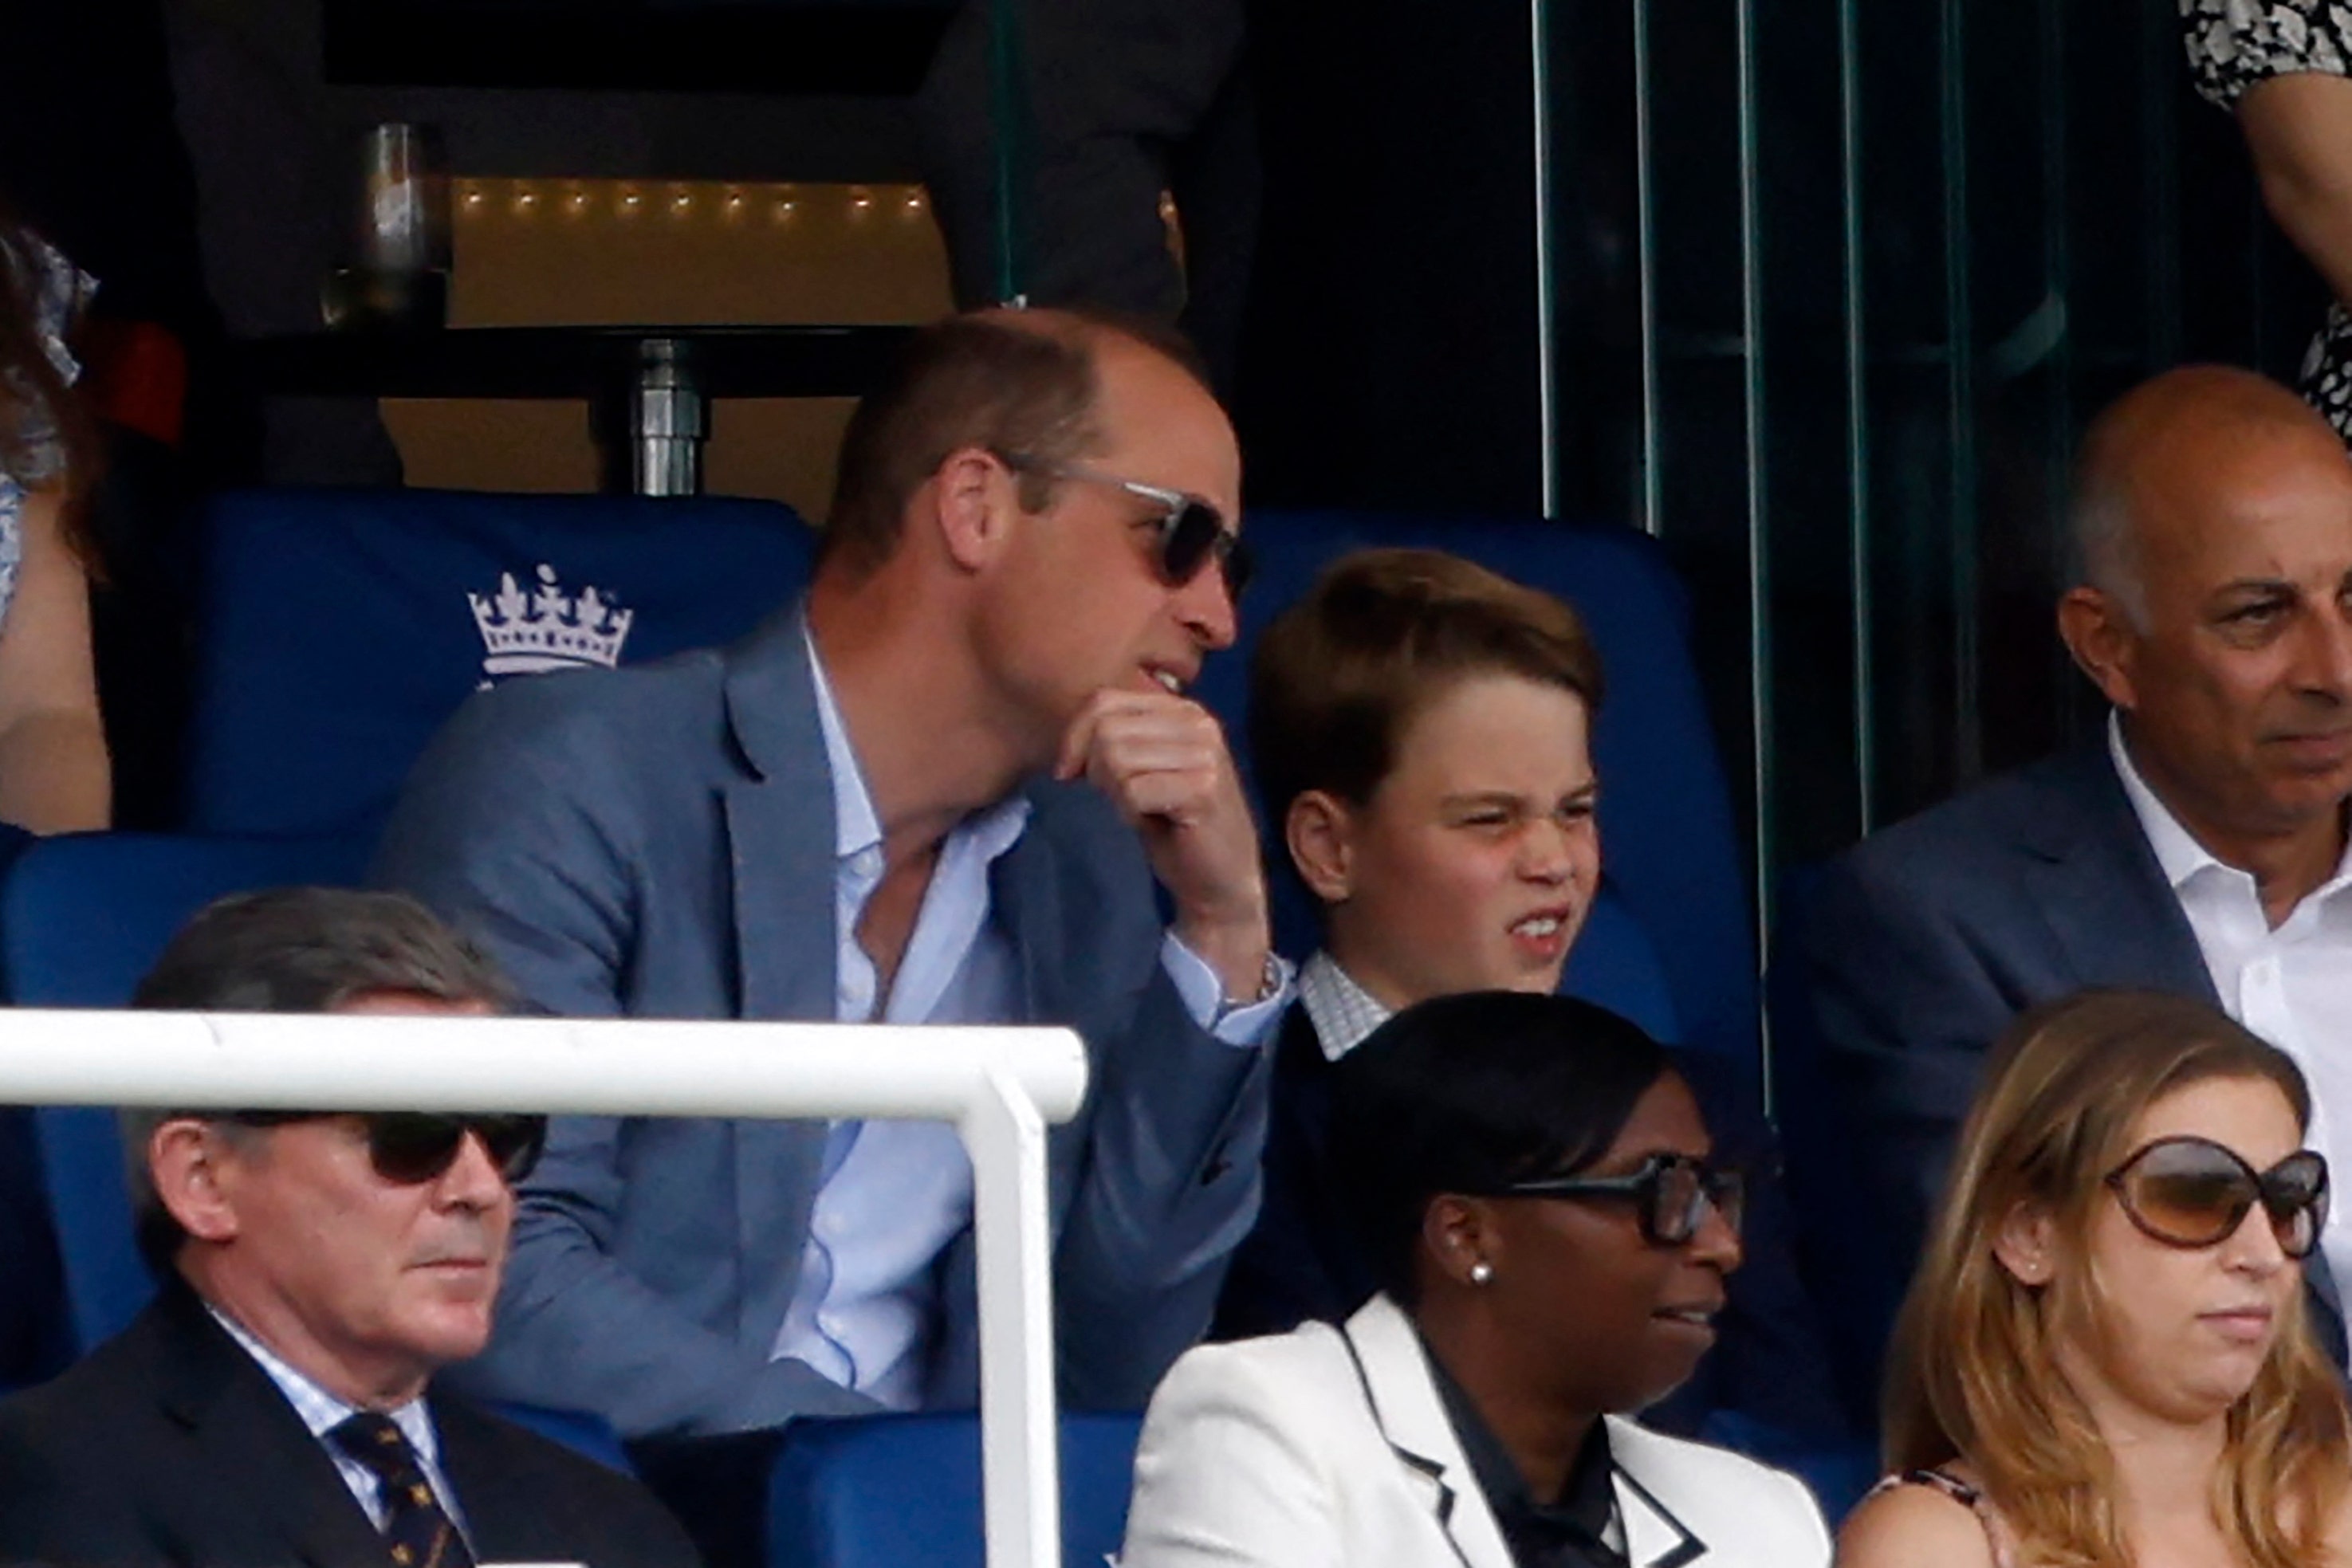 Prince William and Prince George spend day father-son bonding at cricket match